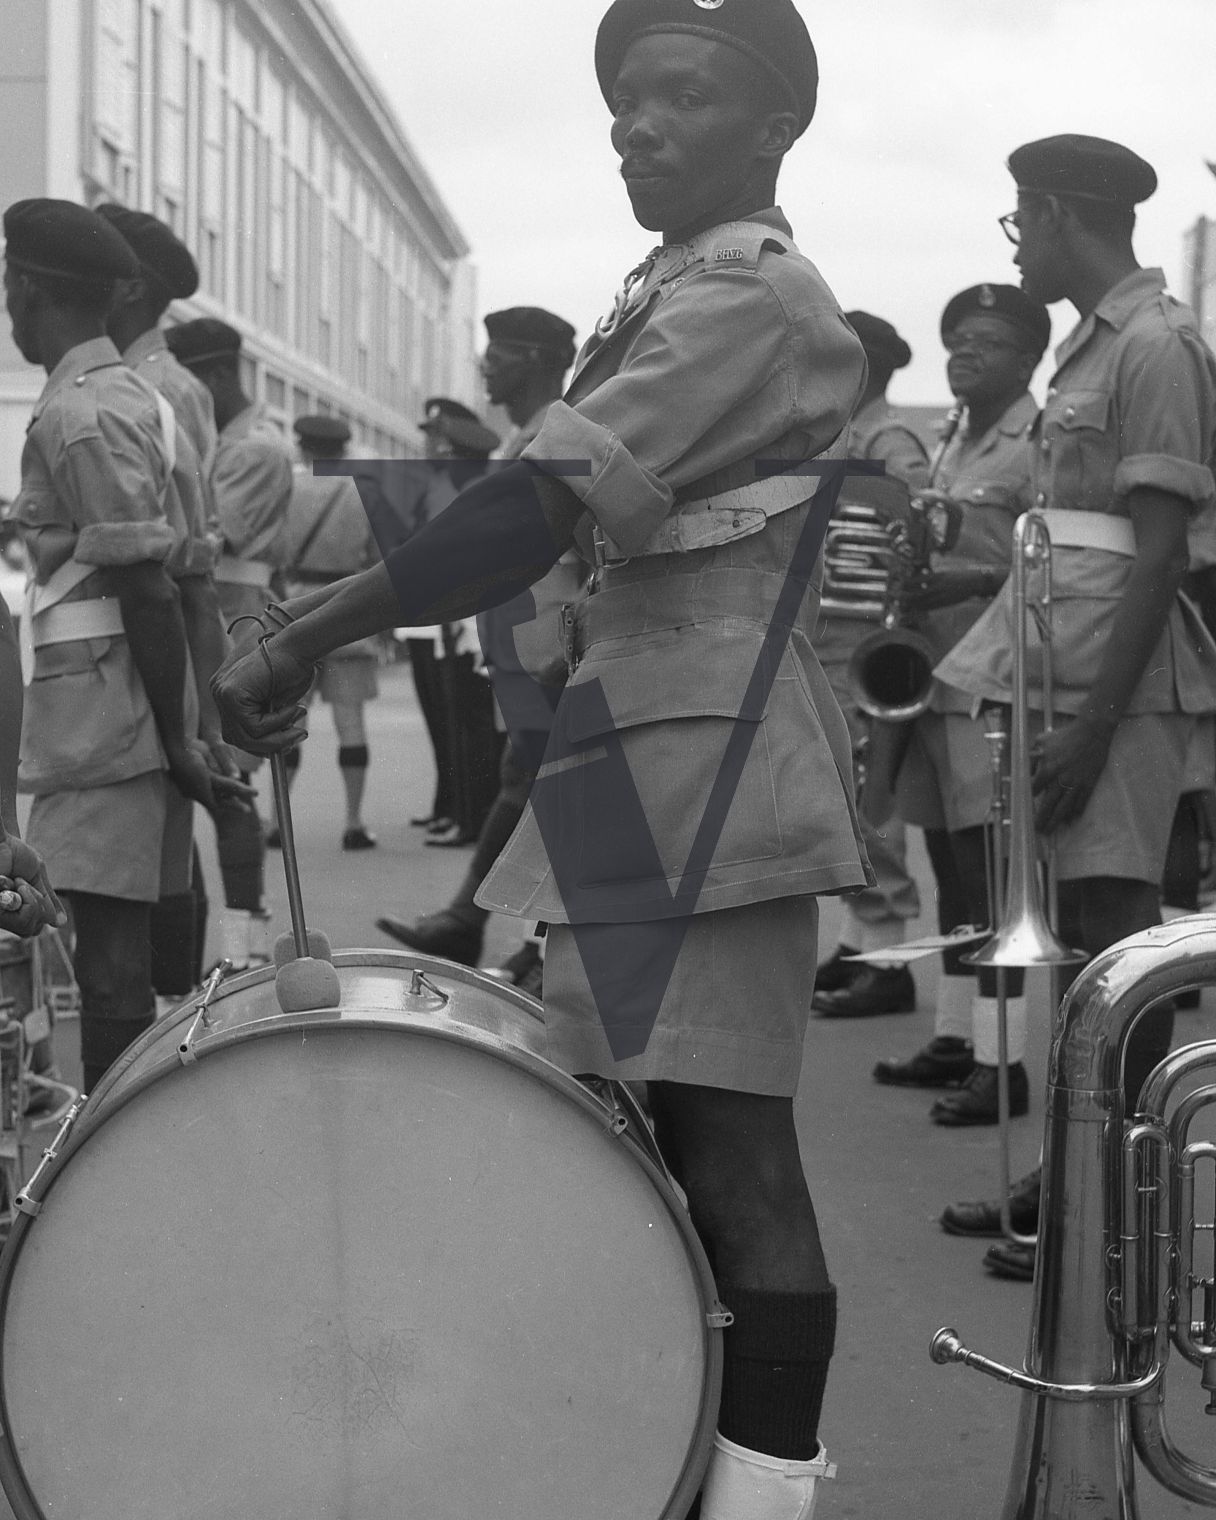 Belize, parade, soldiers in uniform, guns, military band, drums.